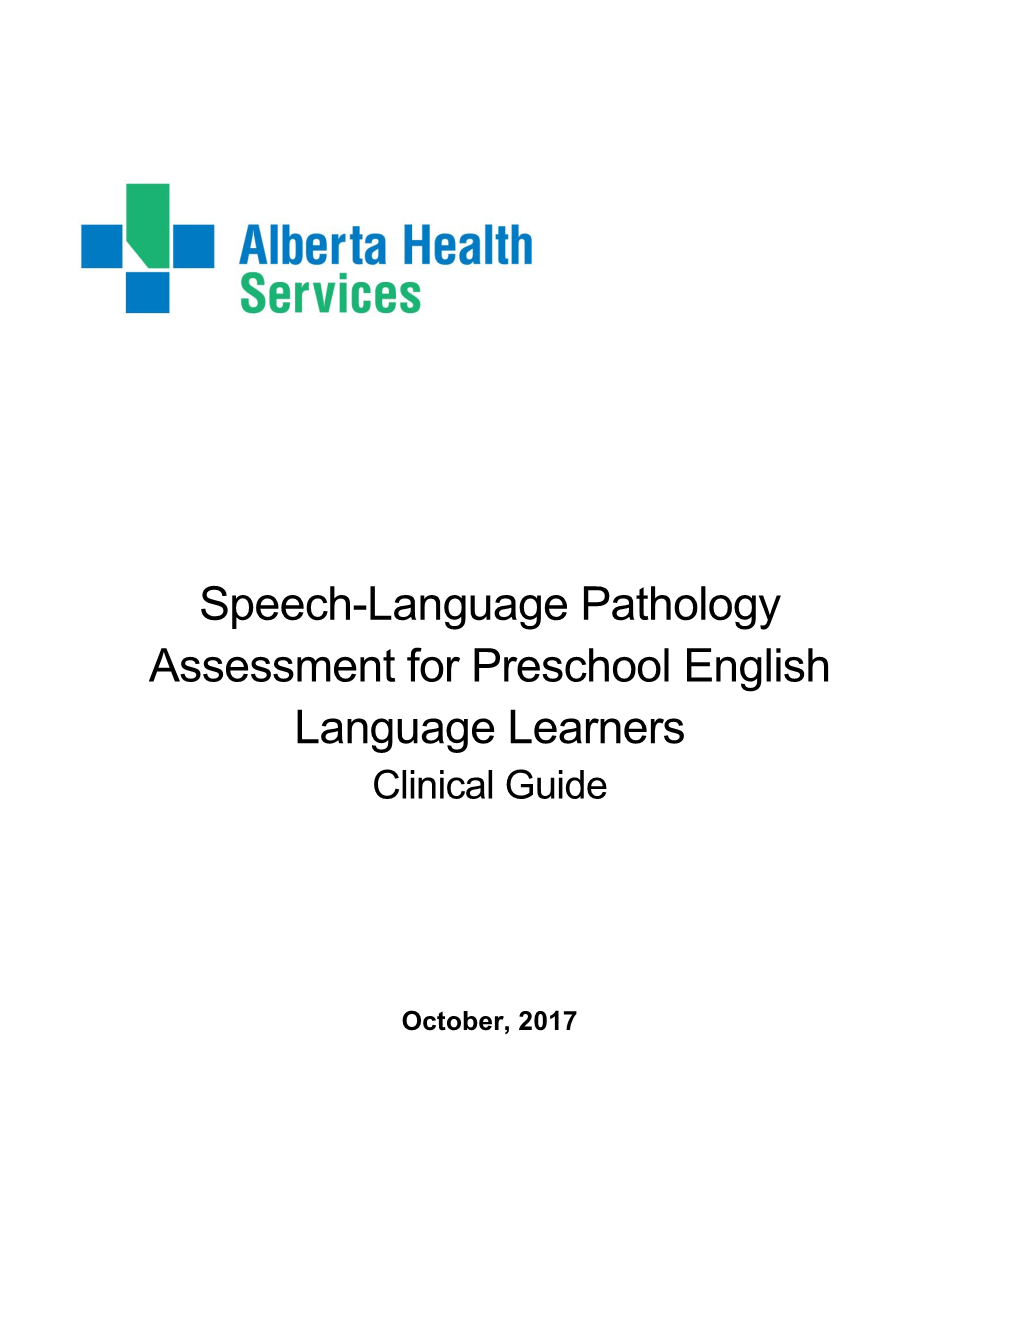 Speech-Language Pathology Assessment for Preschool English Language Learners Clinical Guide